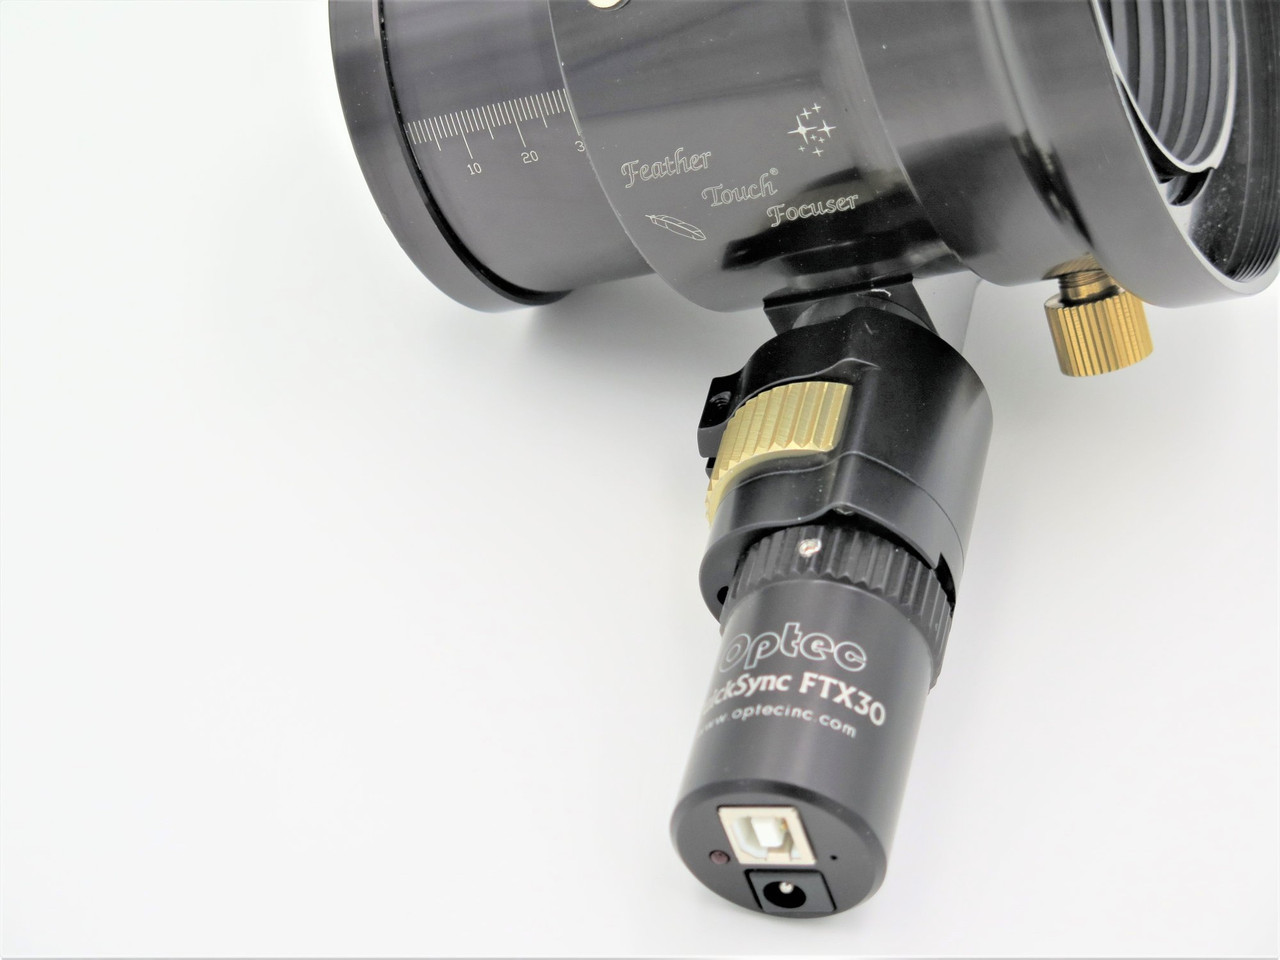 Optec thirdlynx directsync focus motor for feathertouch focusers